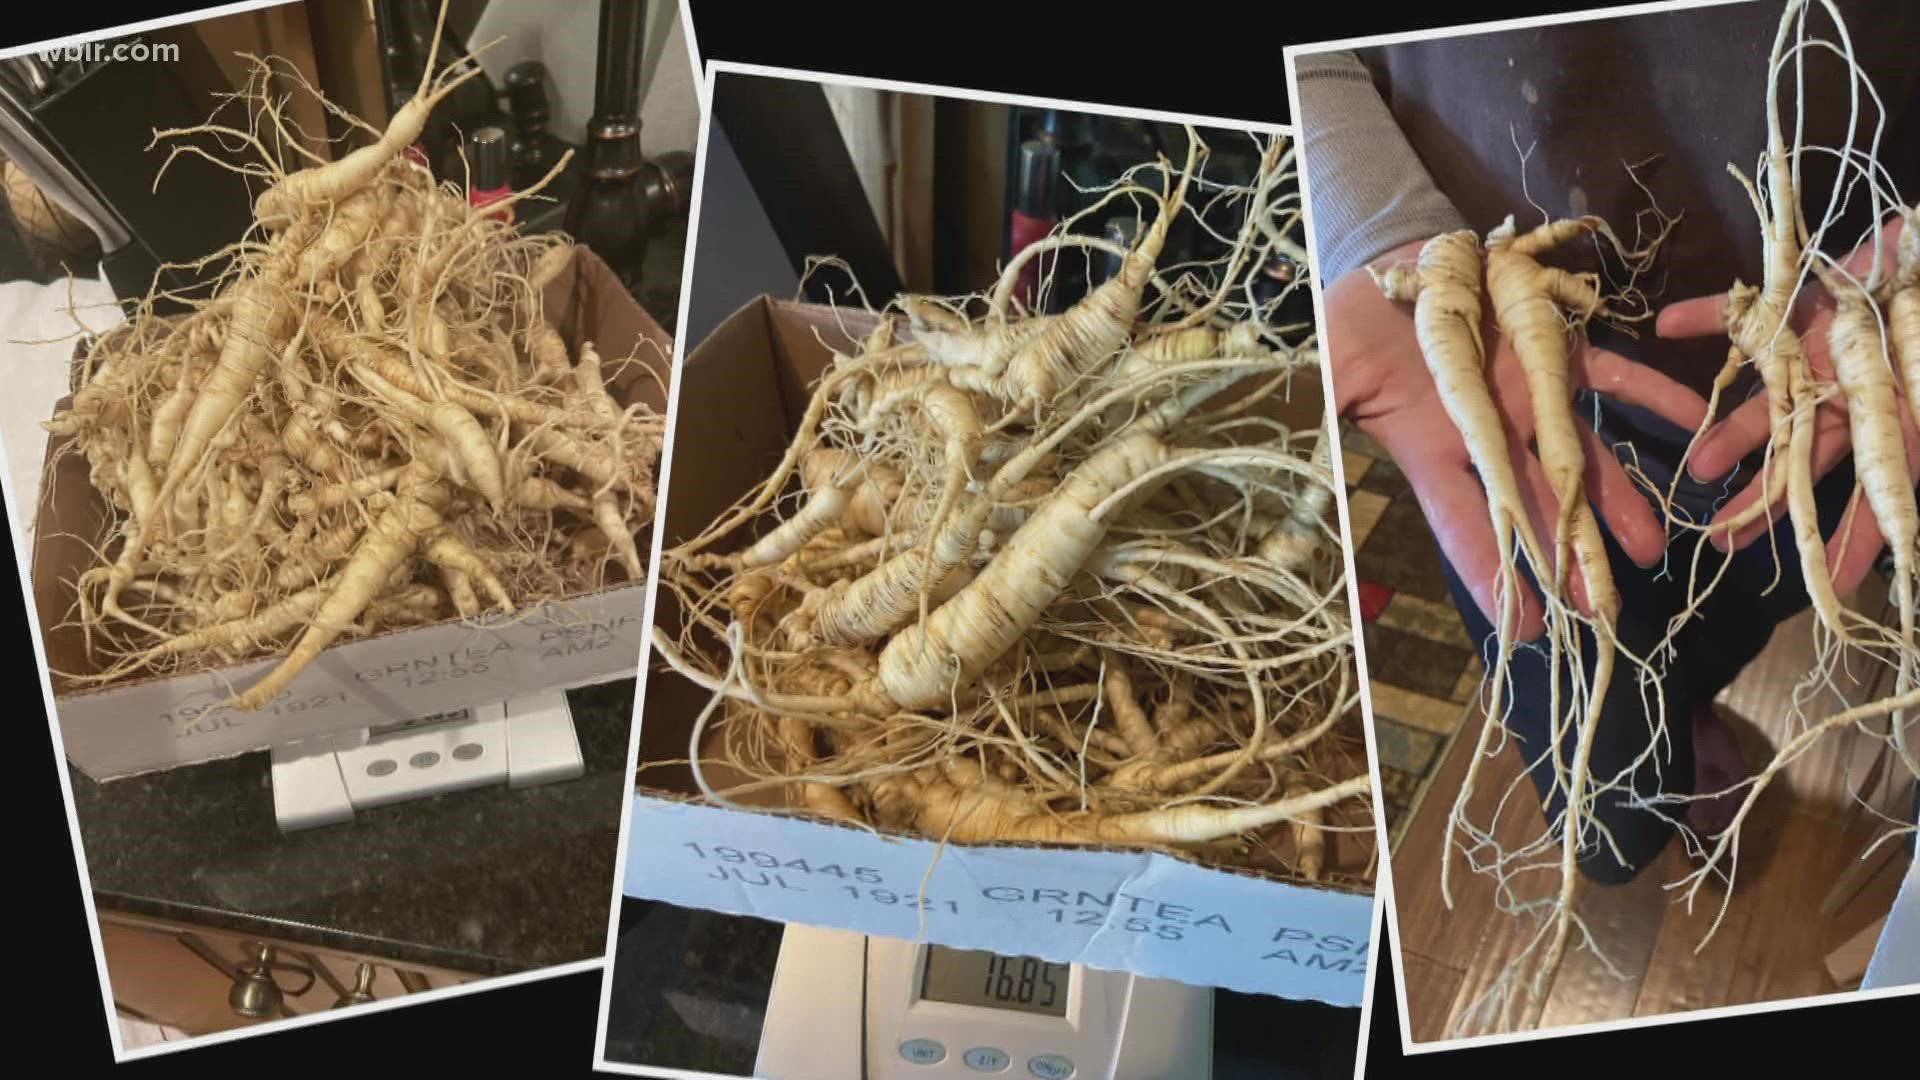 Ginseng hunting is an Appalachian tradition, and families have passed it down to their children generations.